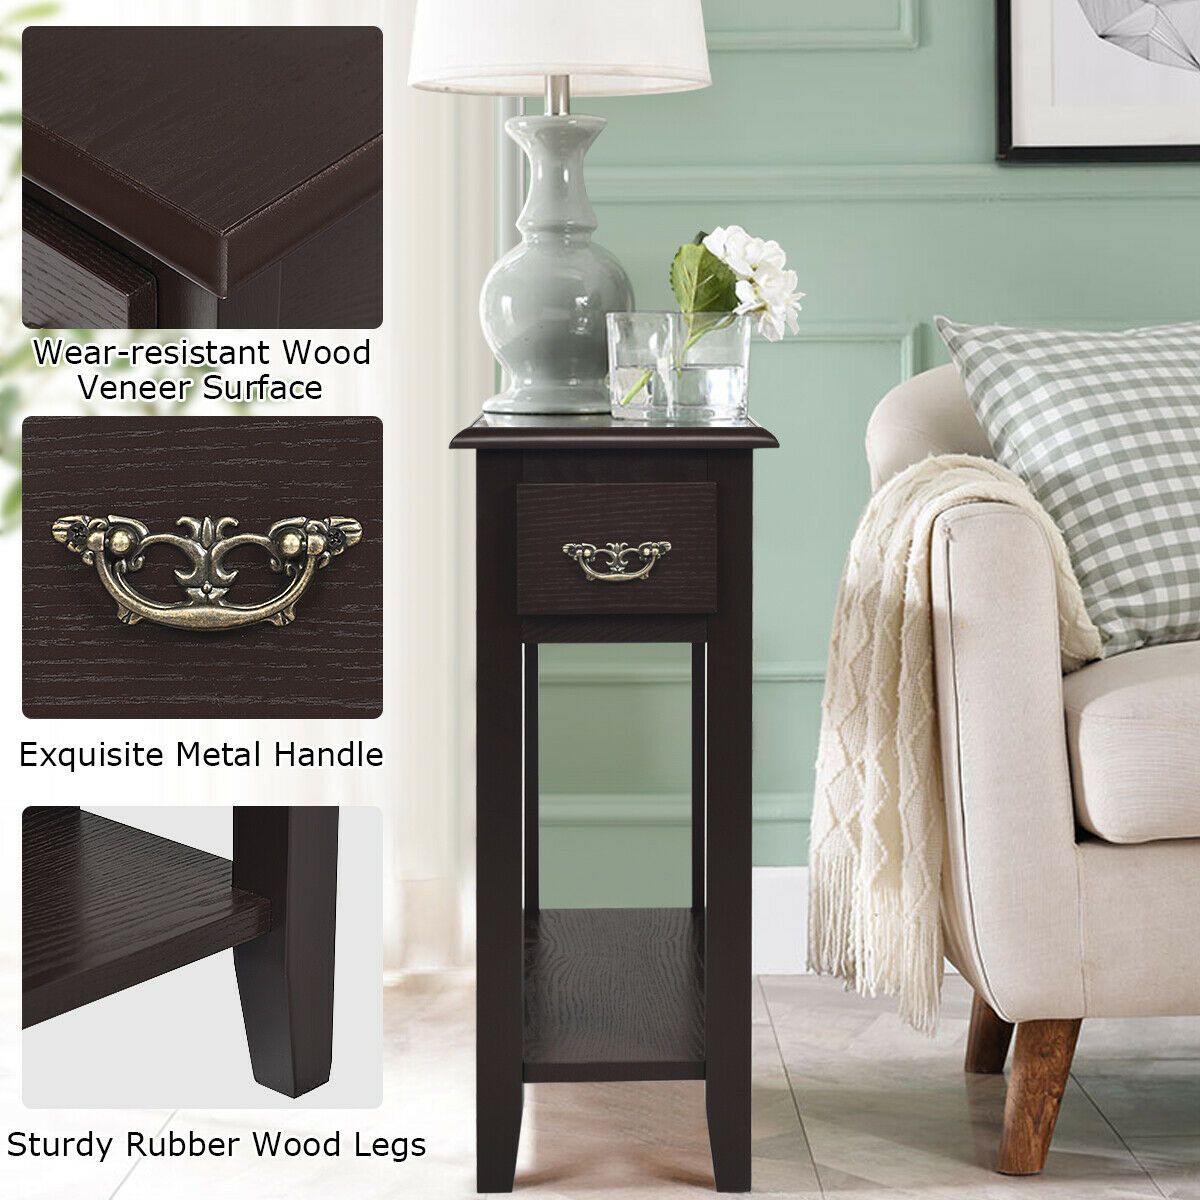 2-Tier Bedside Table with Drawer and Storage Shelf